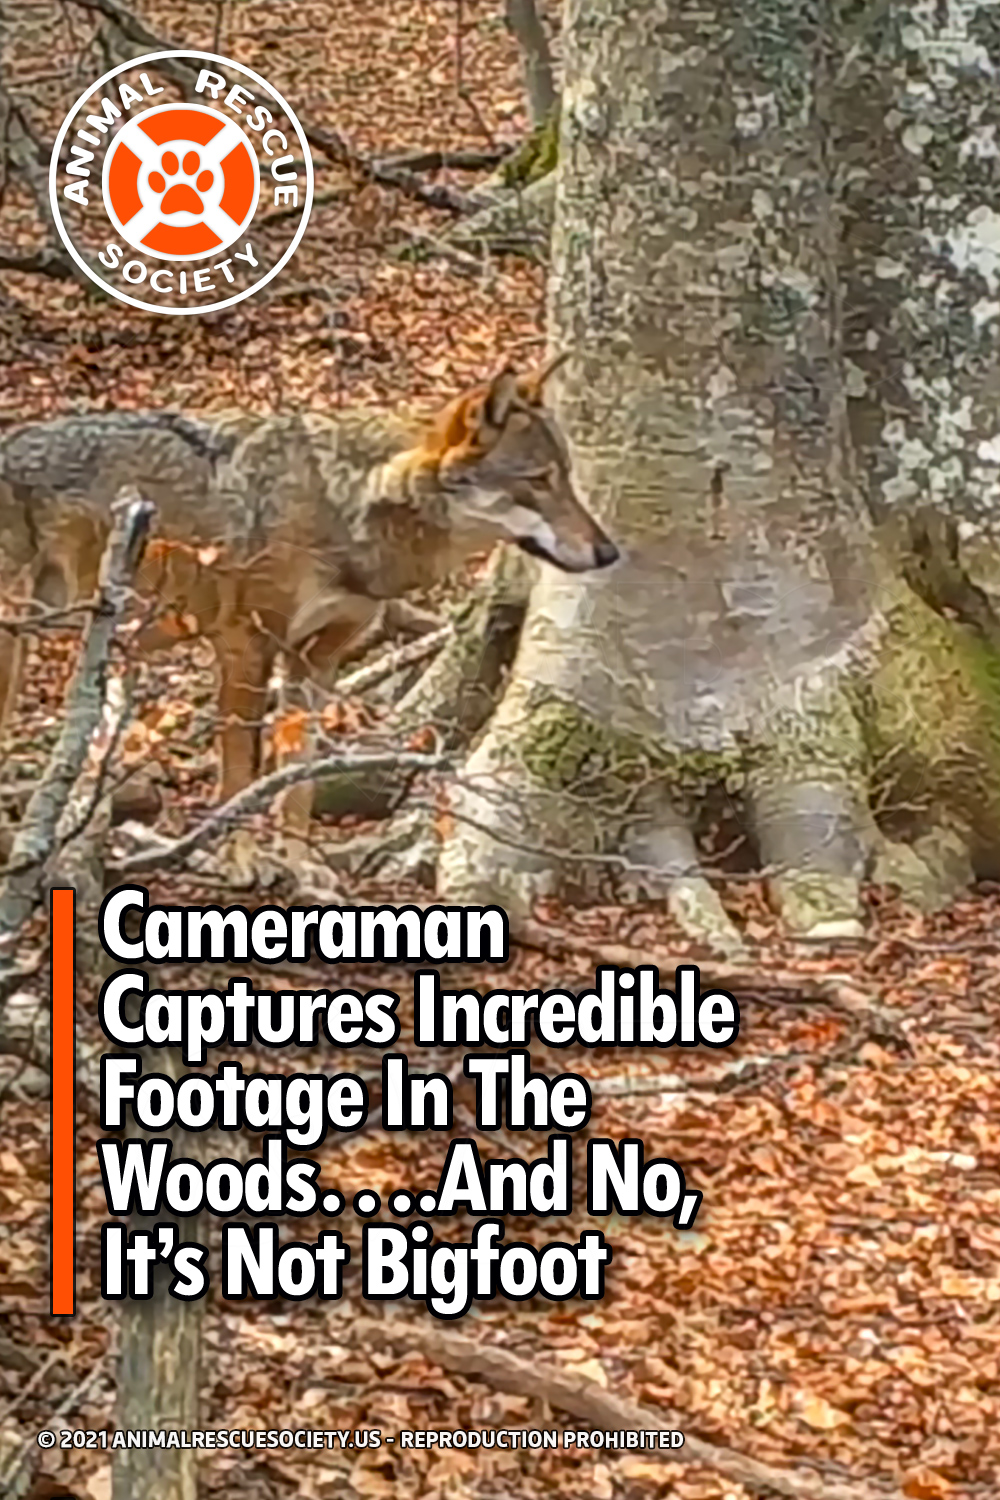 Cameraman Captures Incredible Footage In The Woods….And No, It’s Not Bigfoot